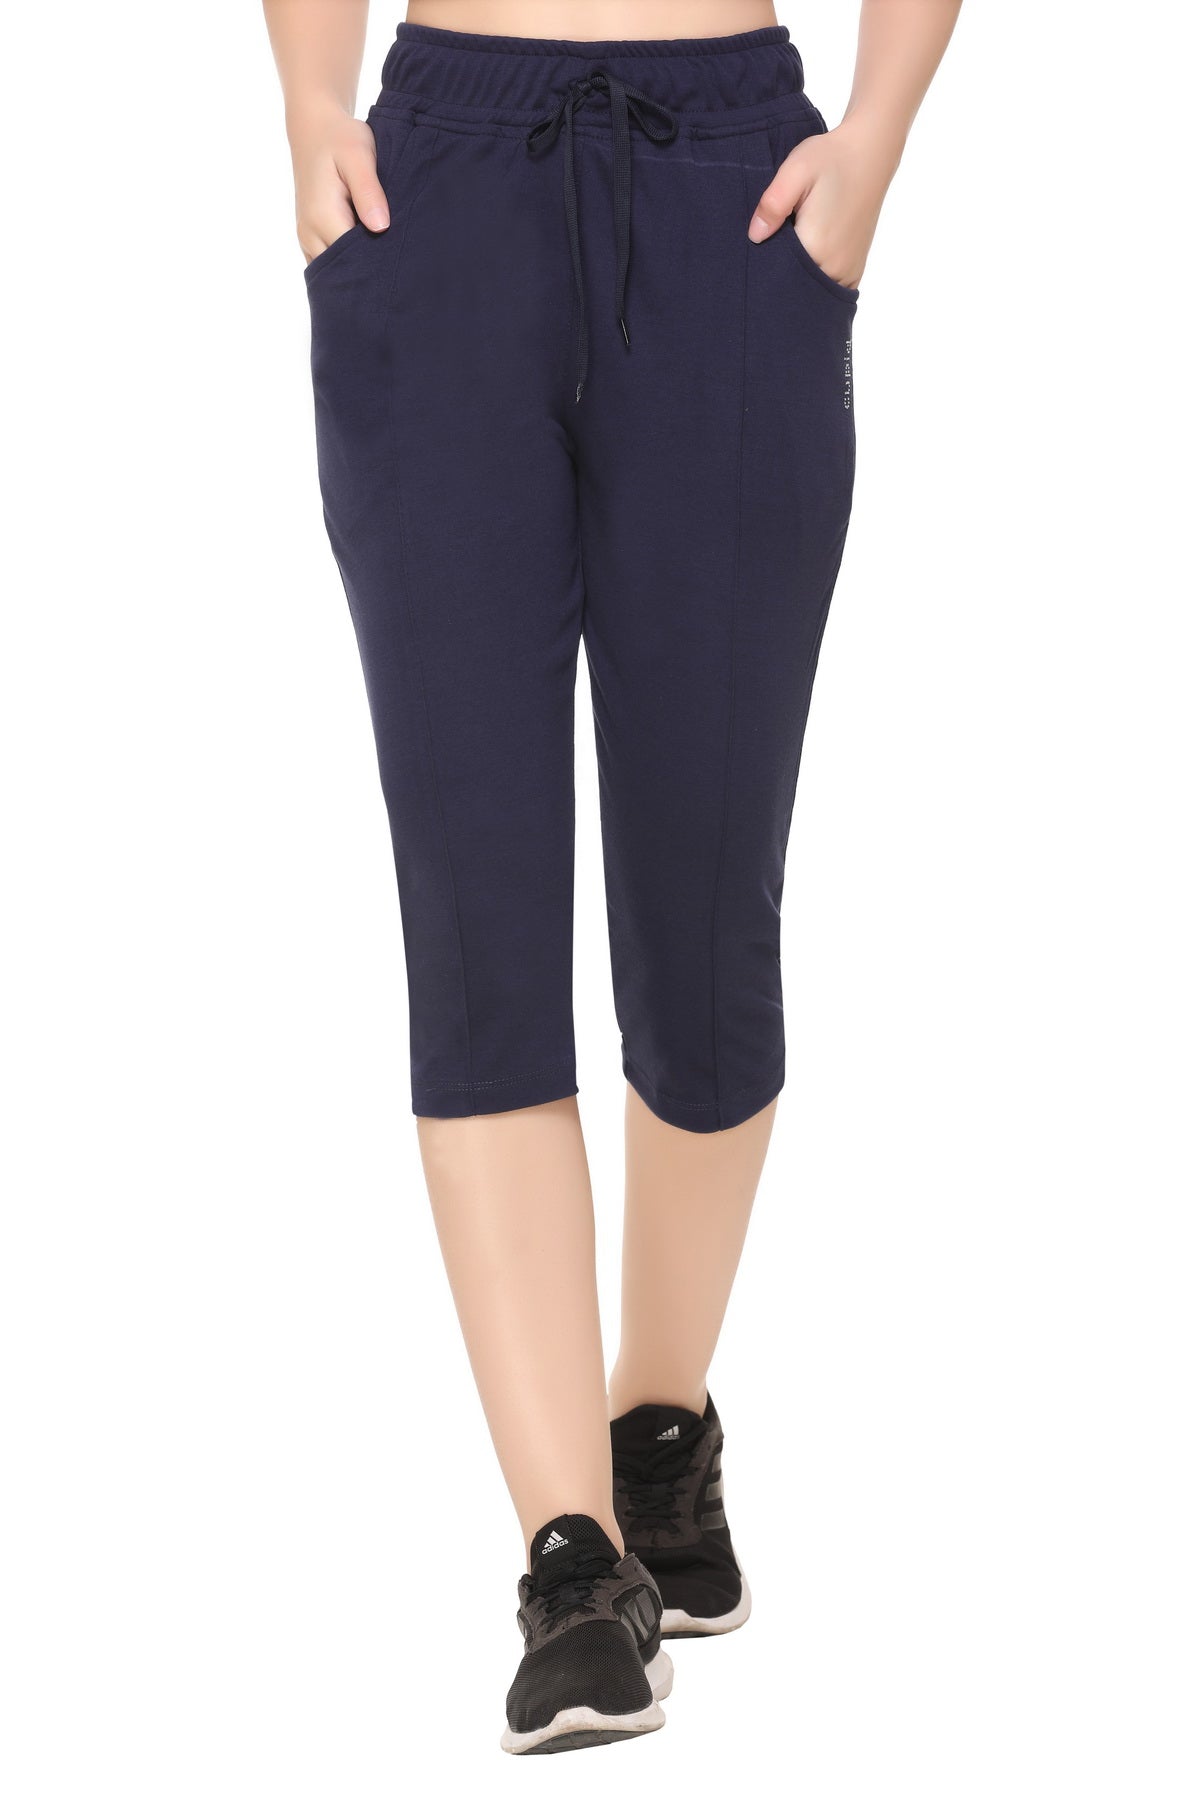 Stylish Imperial Blue Cotton Half Capris For Women online in India